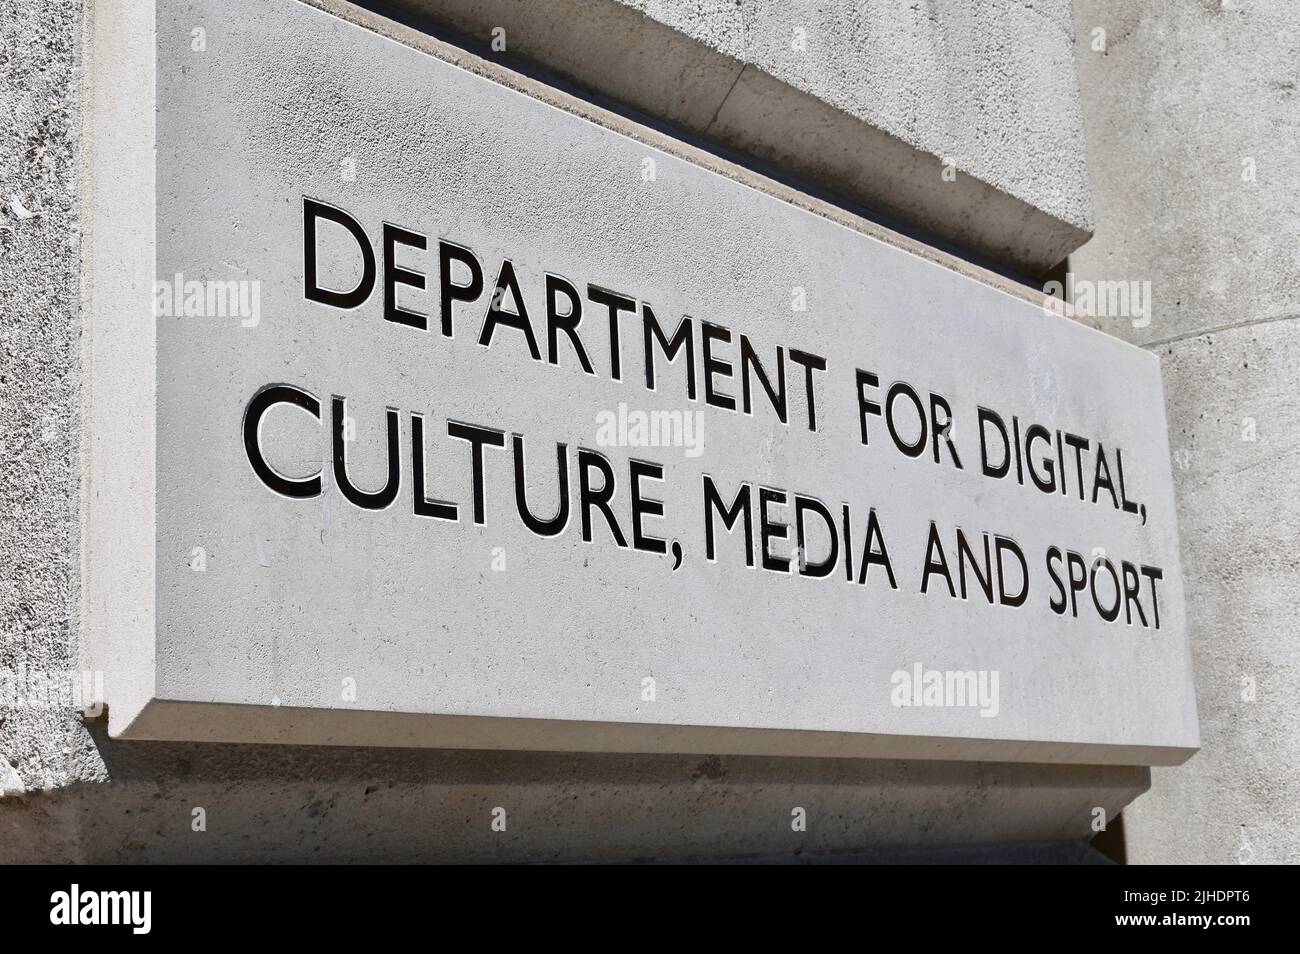 Department for Digital, Culture, Media and Sport Sign, Whitehall, Londres. ROYAUME-UNI Banque D'Images